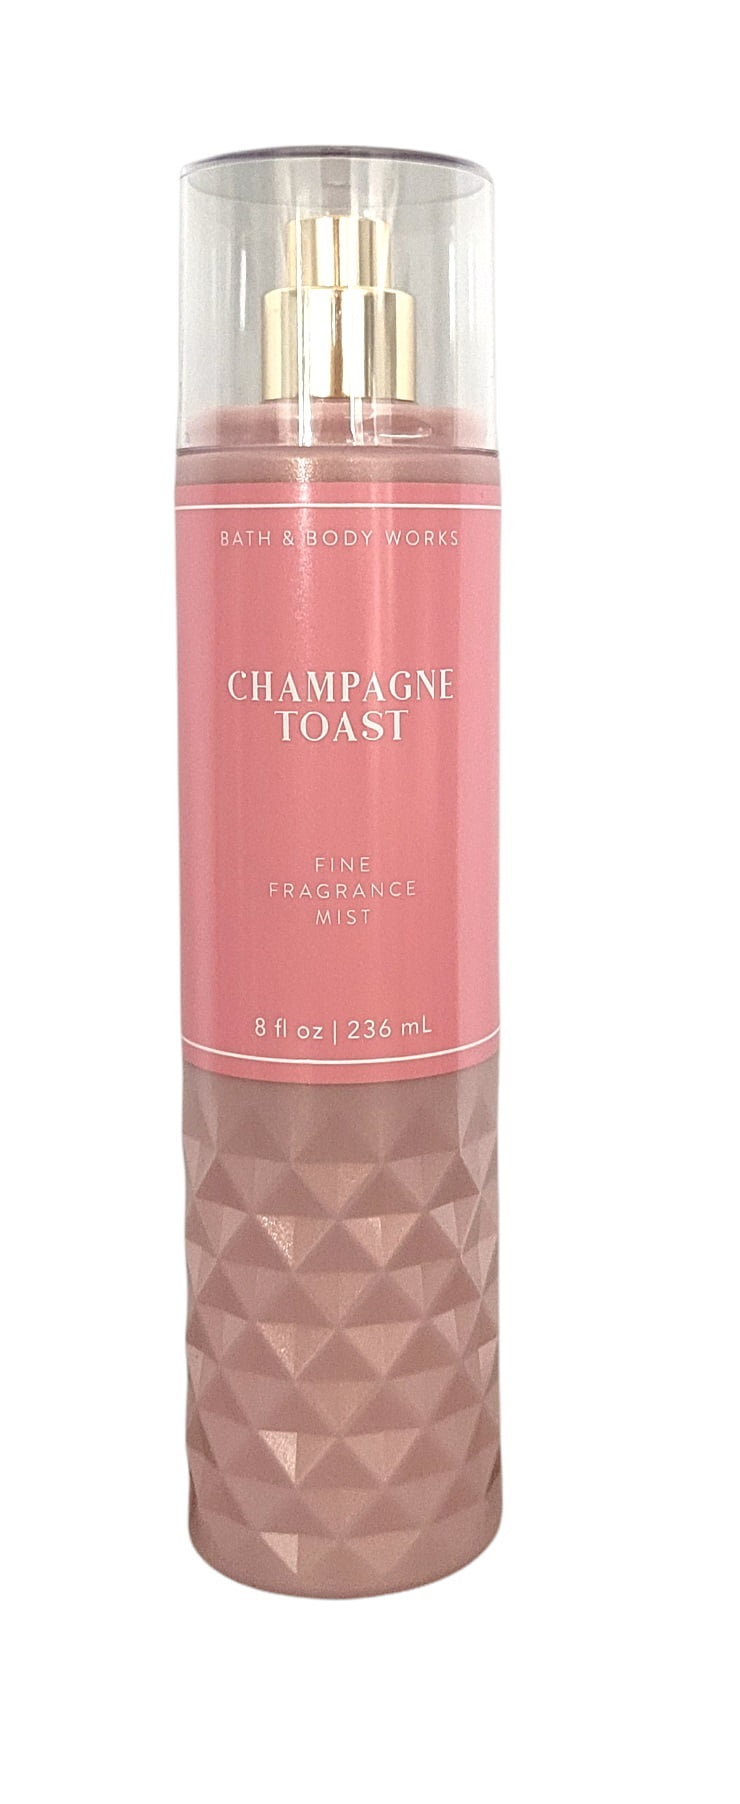 Champagne Toast Bath and Body Works for women